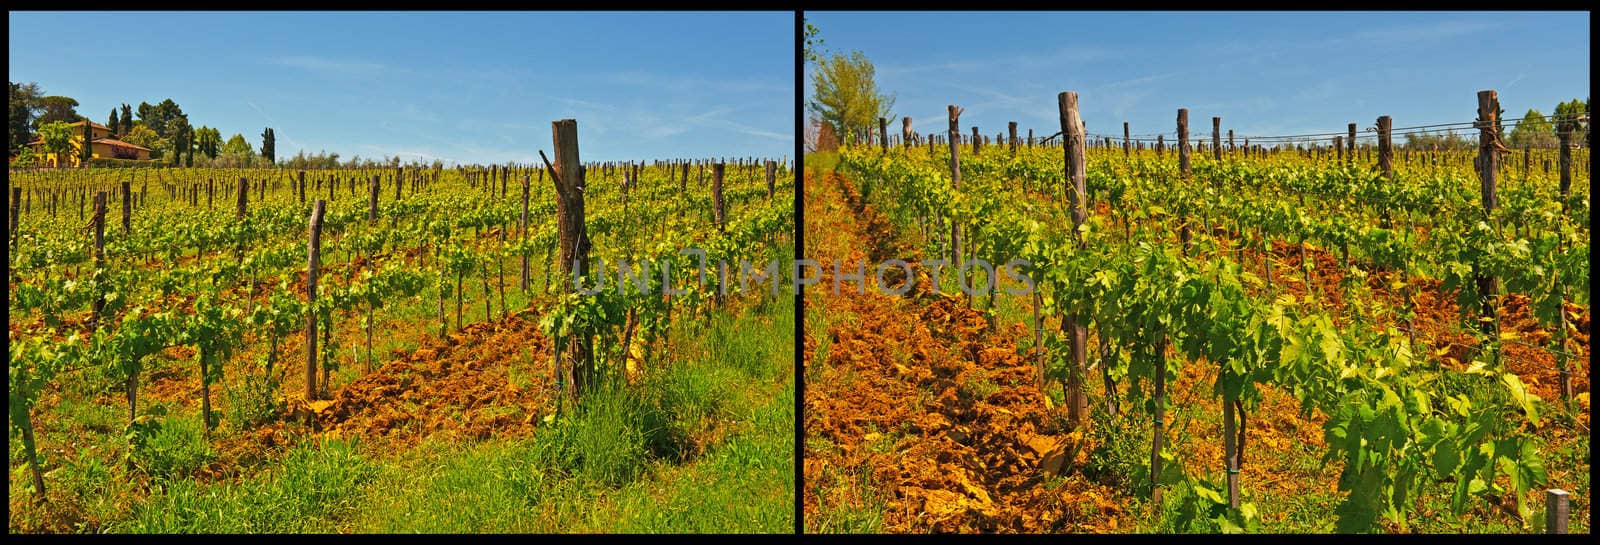 Hill of Tuscany with Vineyard in the Chianti Region, Set